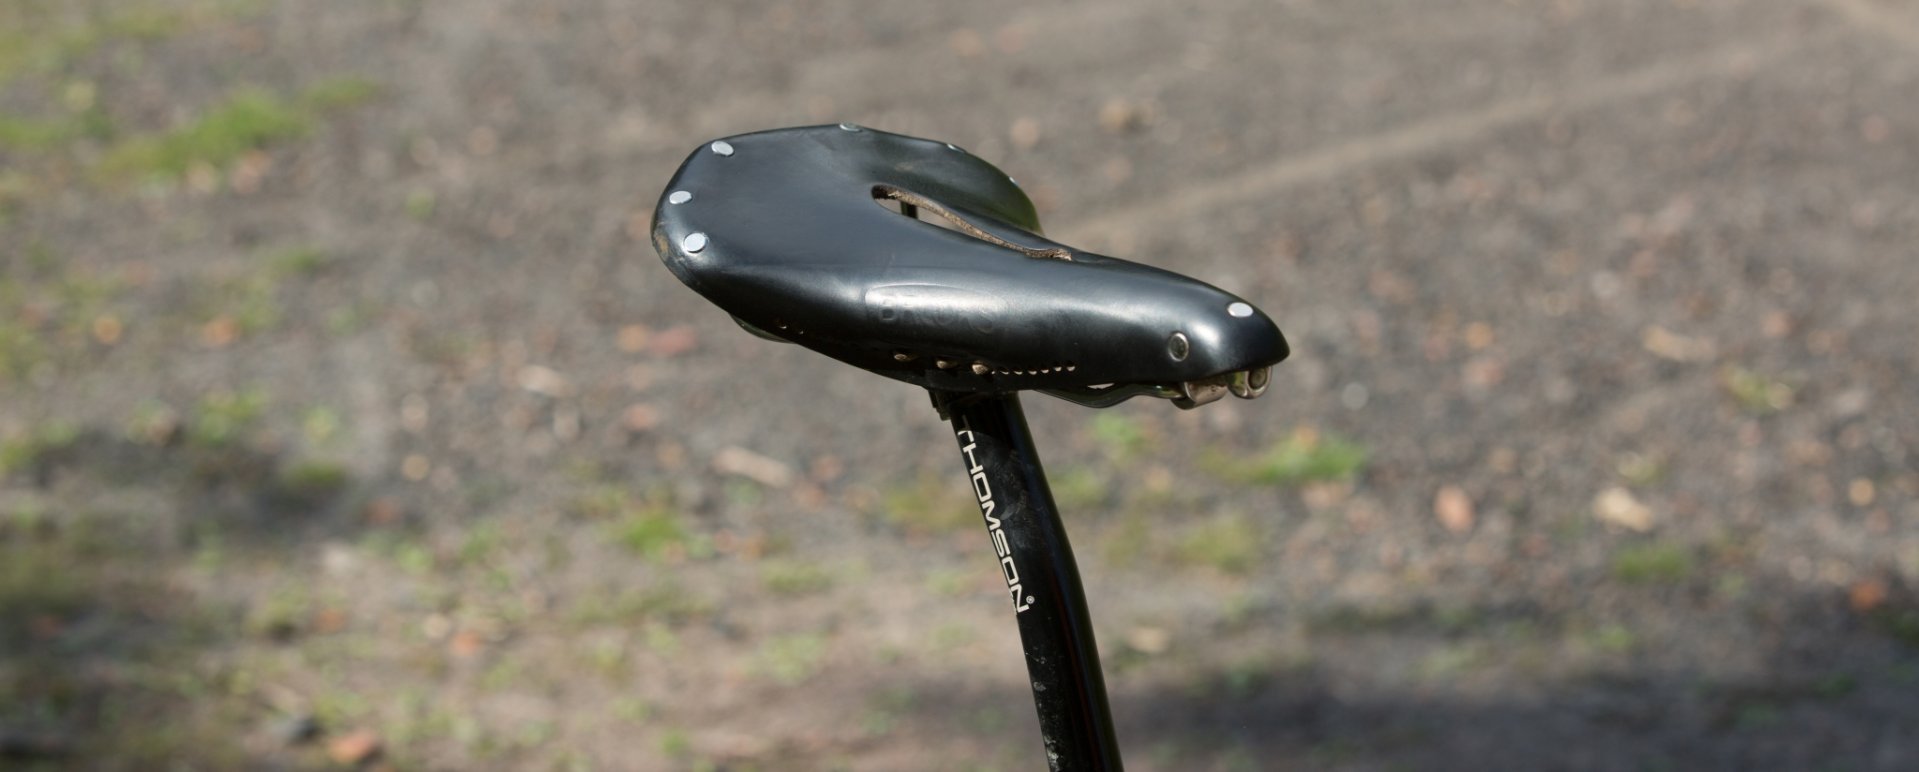 My well broken-in Brooks saddle sits perfectly atop the setback Thomson seatpost.